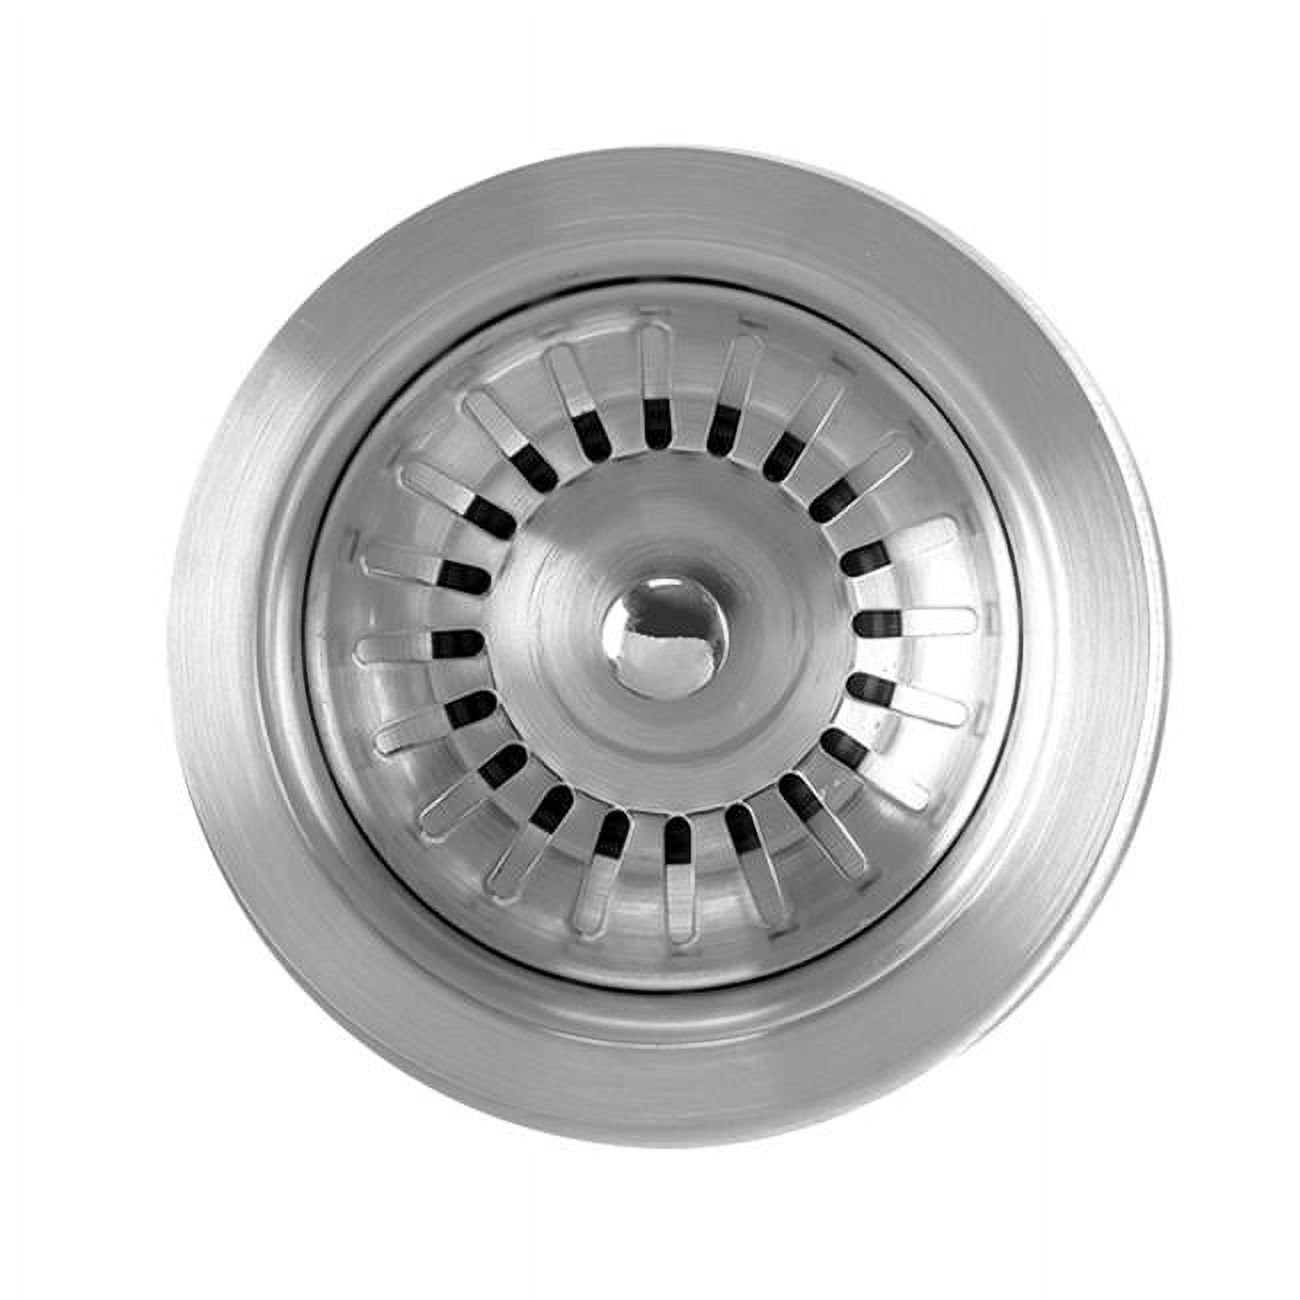 Picture of Alfi Trade WHNPL35-SS 3.5 in. Noah Plus Stainless Steel Basket Strainer - Brushed Stainless